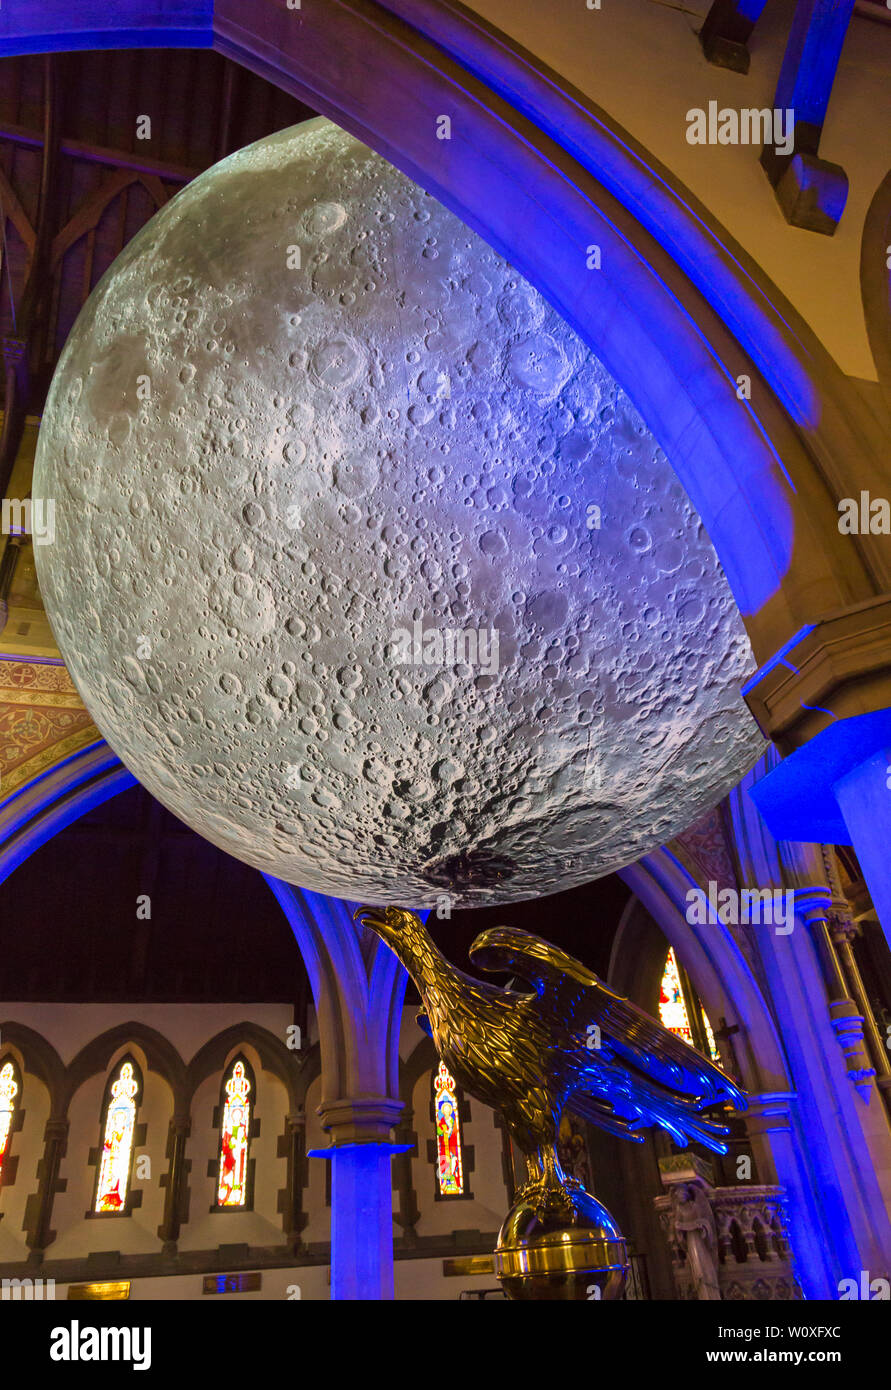 Bournemouth, Dorset UK. 28th June 2019. Dorset Moon, a celebration of the first moon landing 50 years ago featuring Luke Jerram’s internationally acclaimed Museum of the Moon measuring 7 meters in diameter in St Peters Church. A full programme of free lunar-inspired events create an experience that is out of this world over the three days starting today. Credit: Carolyn Jenkins/Alamy Live News Stock Photo